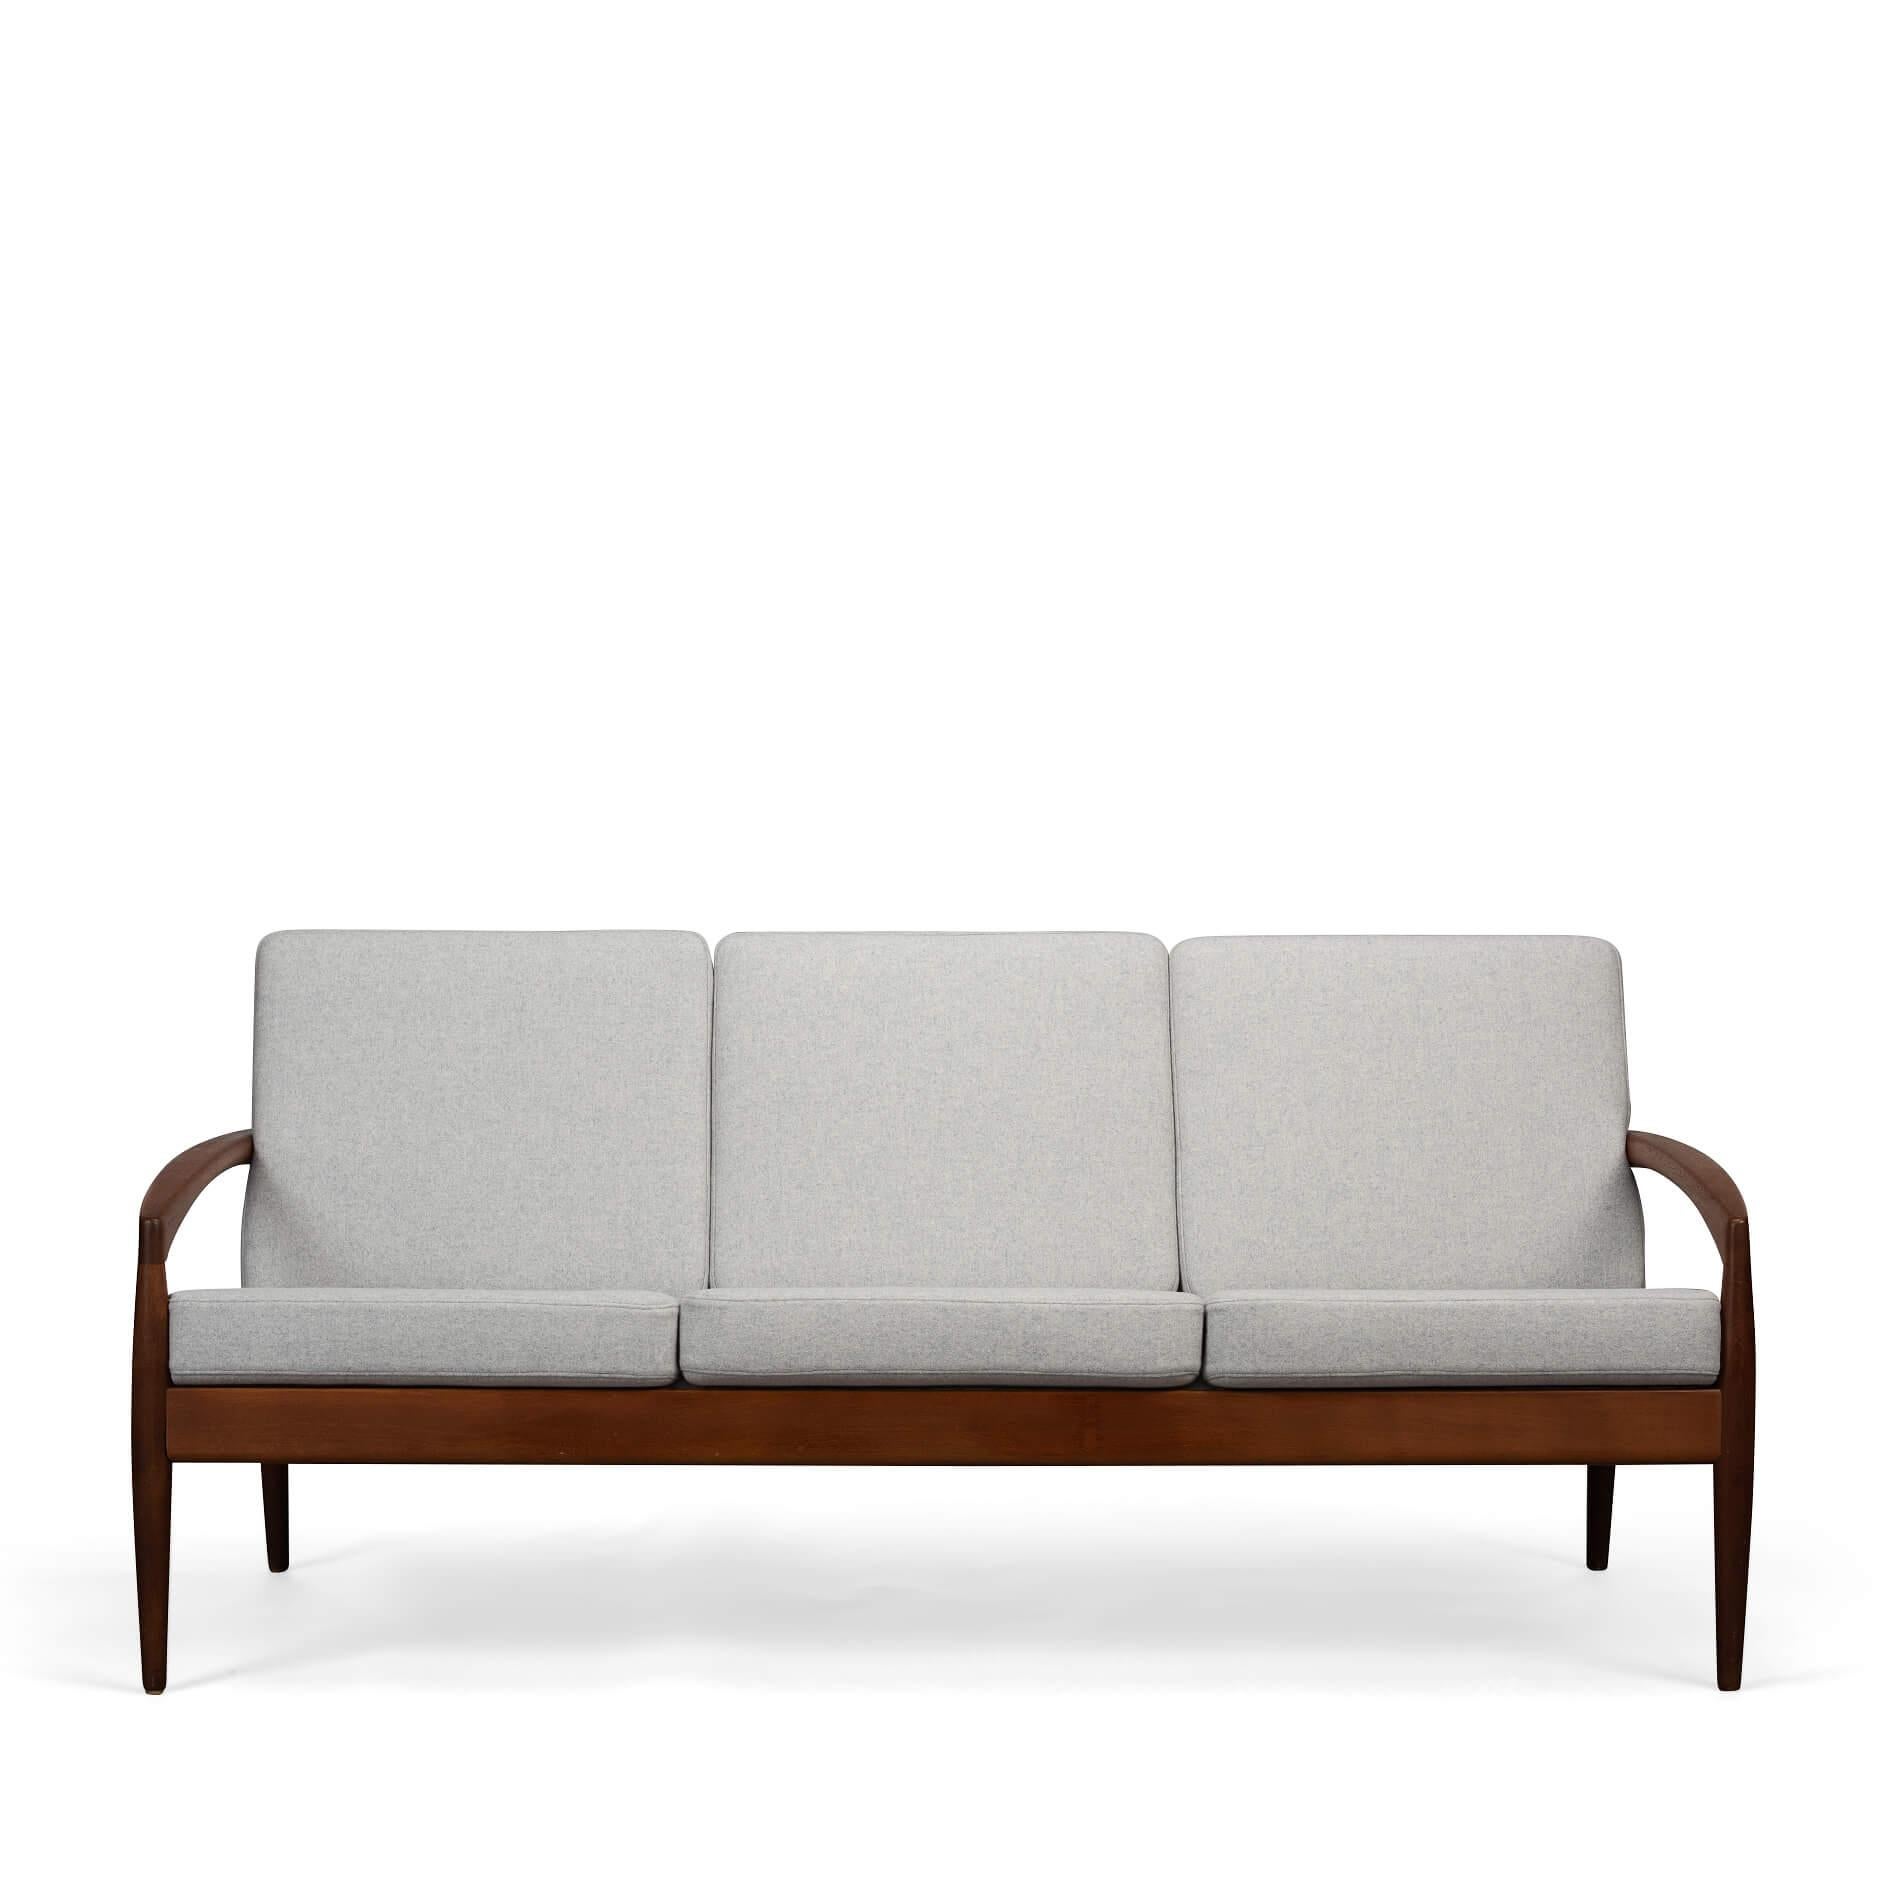 Model 121 sofa : Paper Knife sofa
We are so pleased to present this drop-dead gorgeous and rare ‘Paperknife’ couch designed in the 1950s by Kai Kristiansen for Magnus Olesen, Denmark. This is a 3-seat model in solid teak with brass fittings. Named